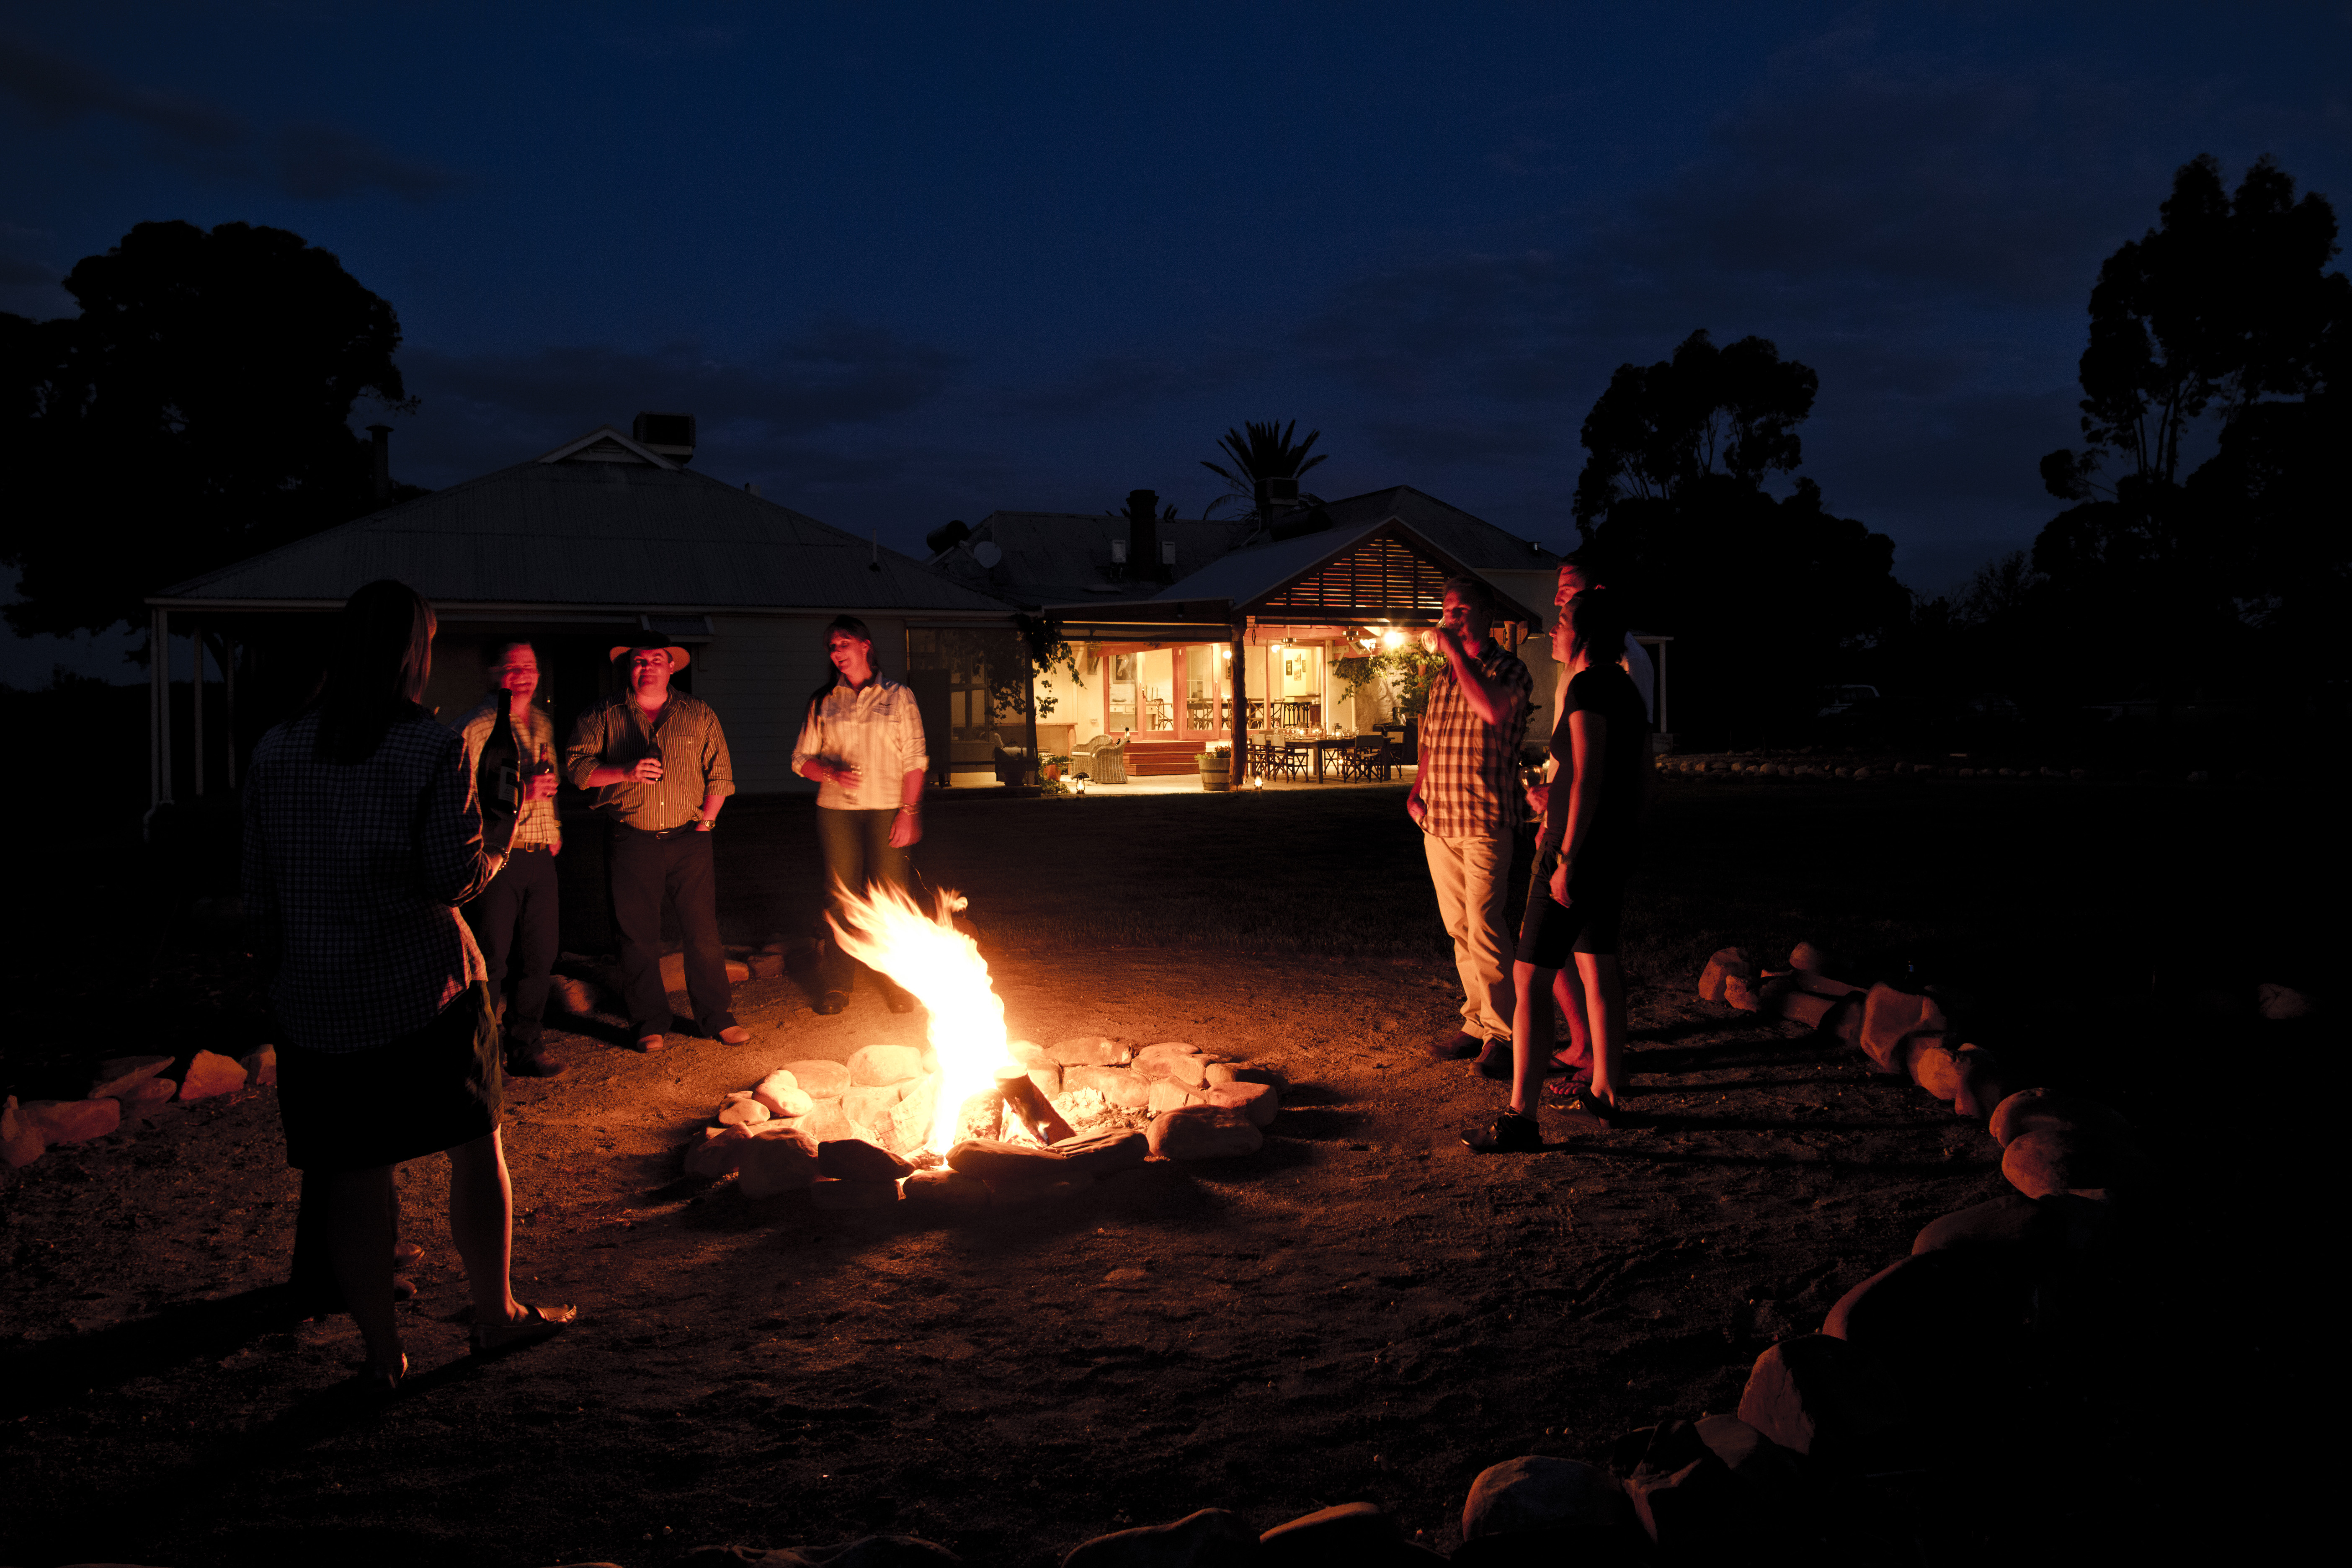 Arkaba_Flinders-Ranges_South-Australia_Campfire - Click to view larger version